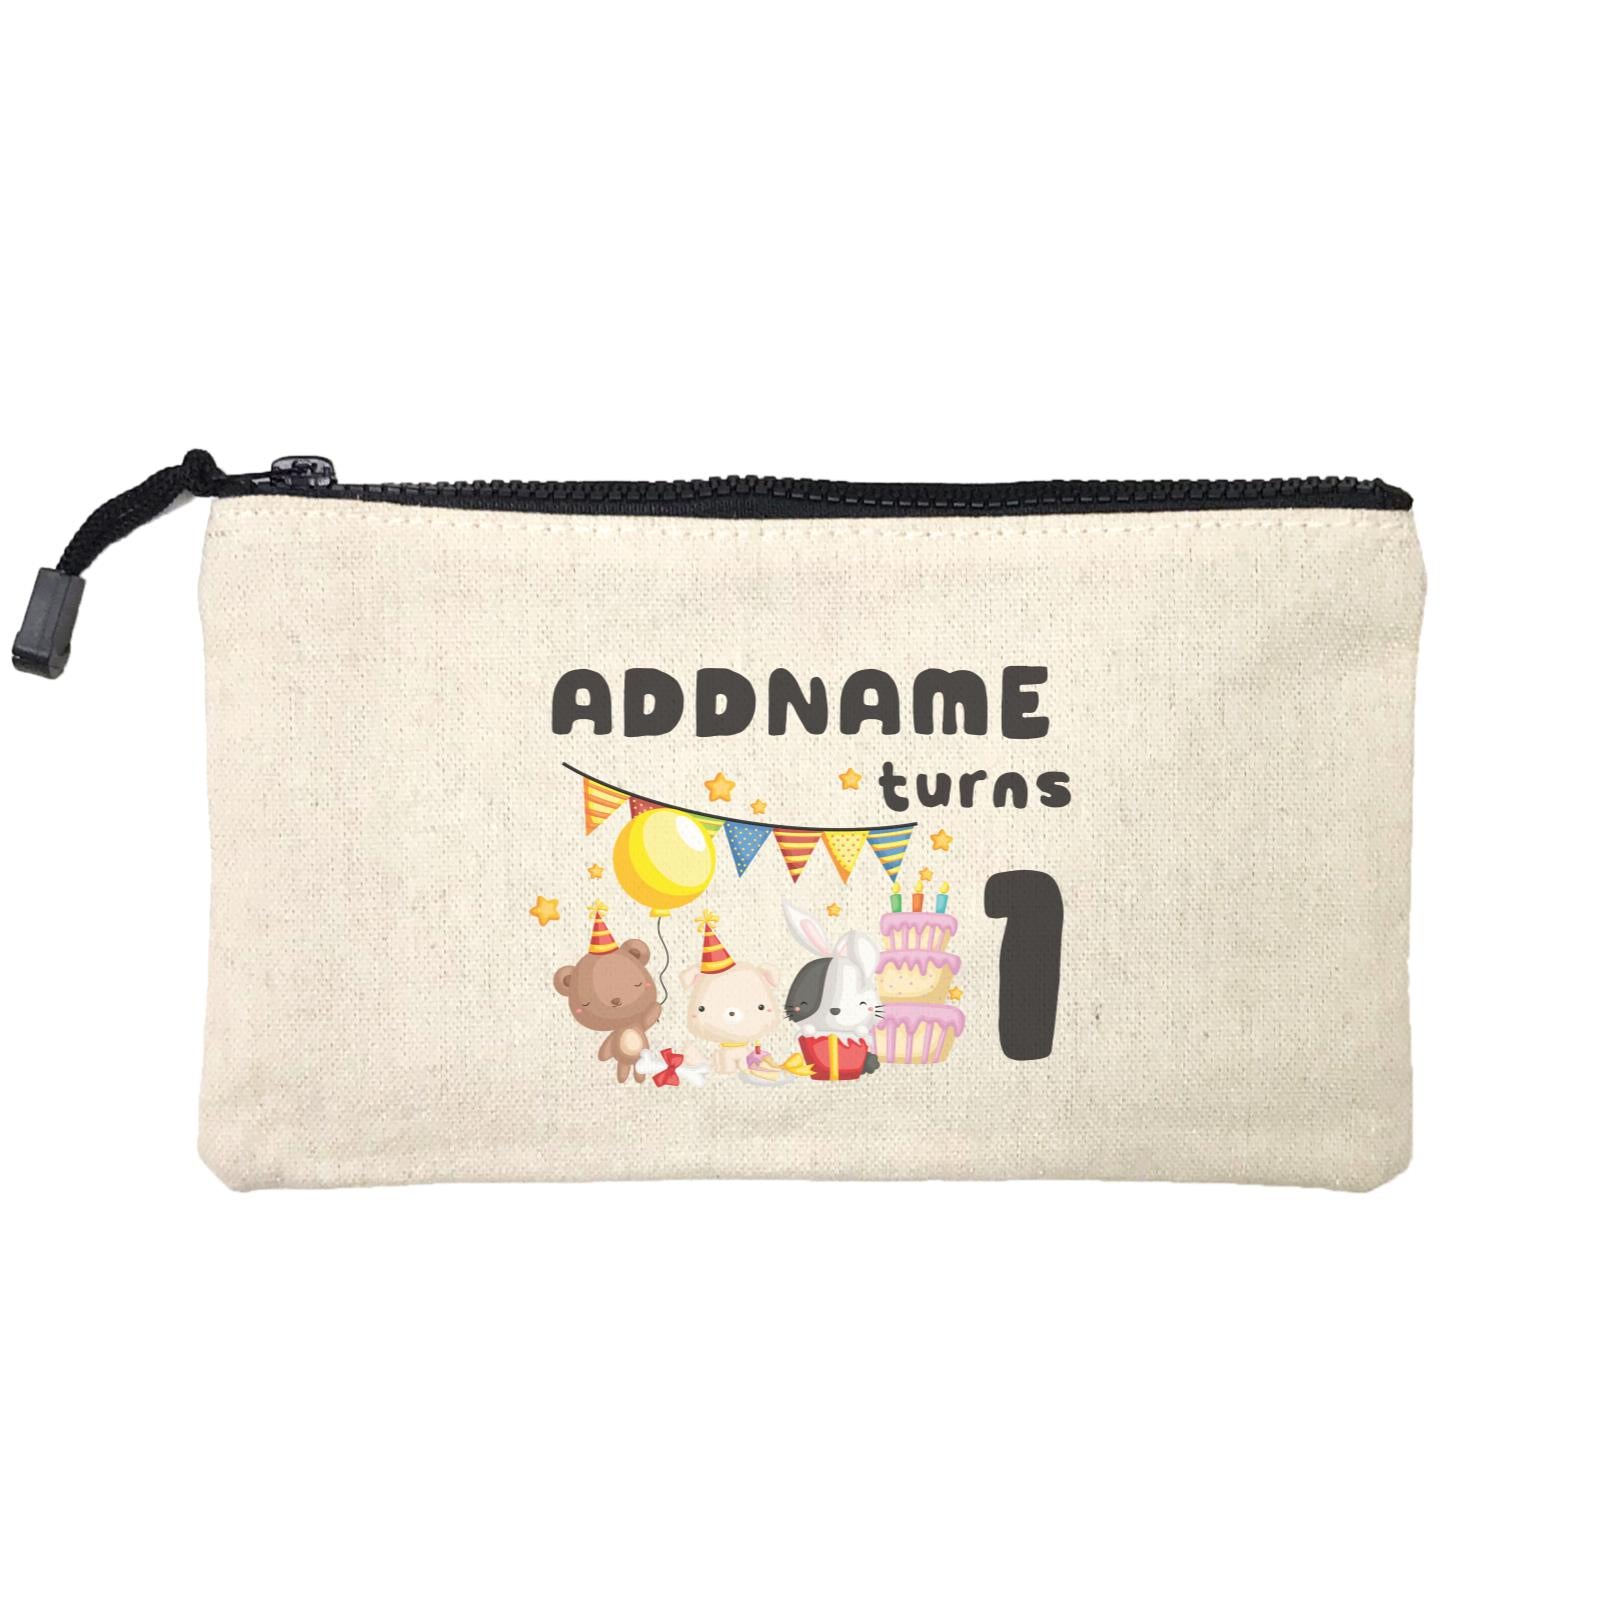 Birthday Friendly Animals Rabbit Bear And Dog Party Addname Turns 1 Mini Accessories Stationery Pouch